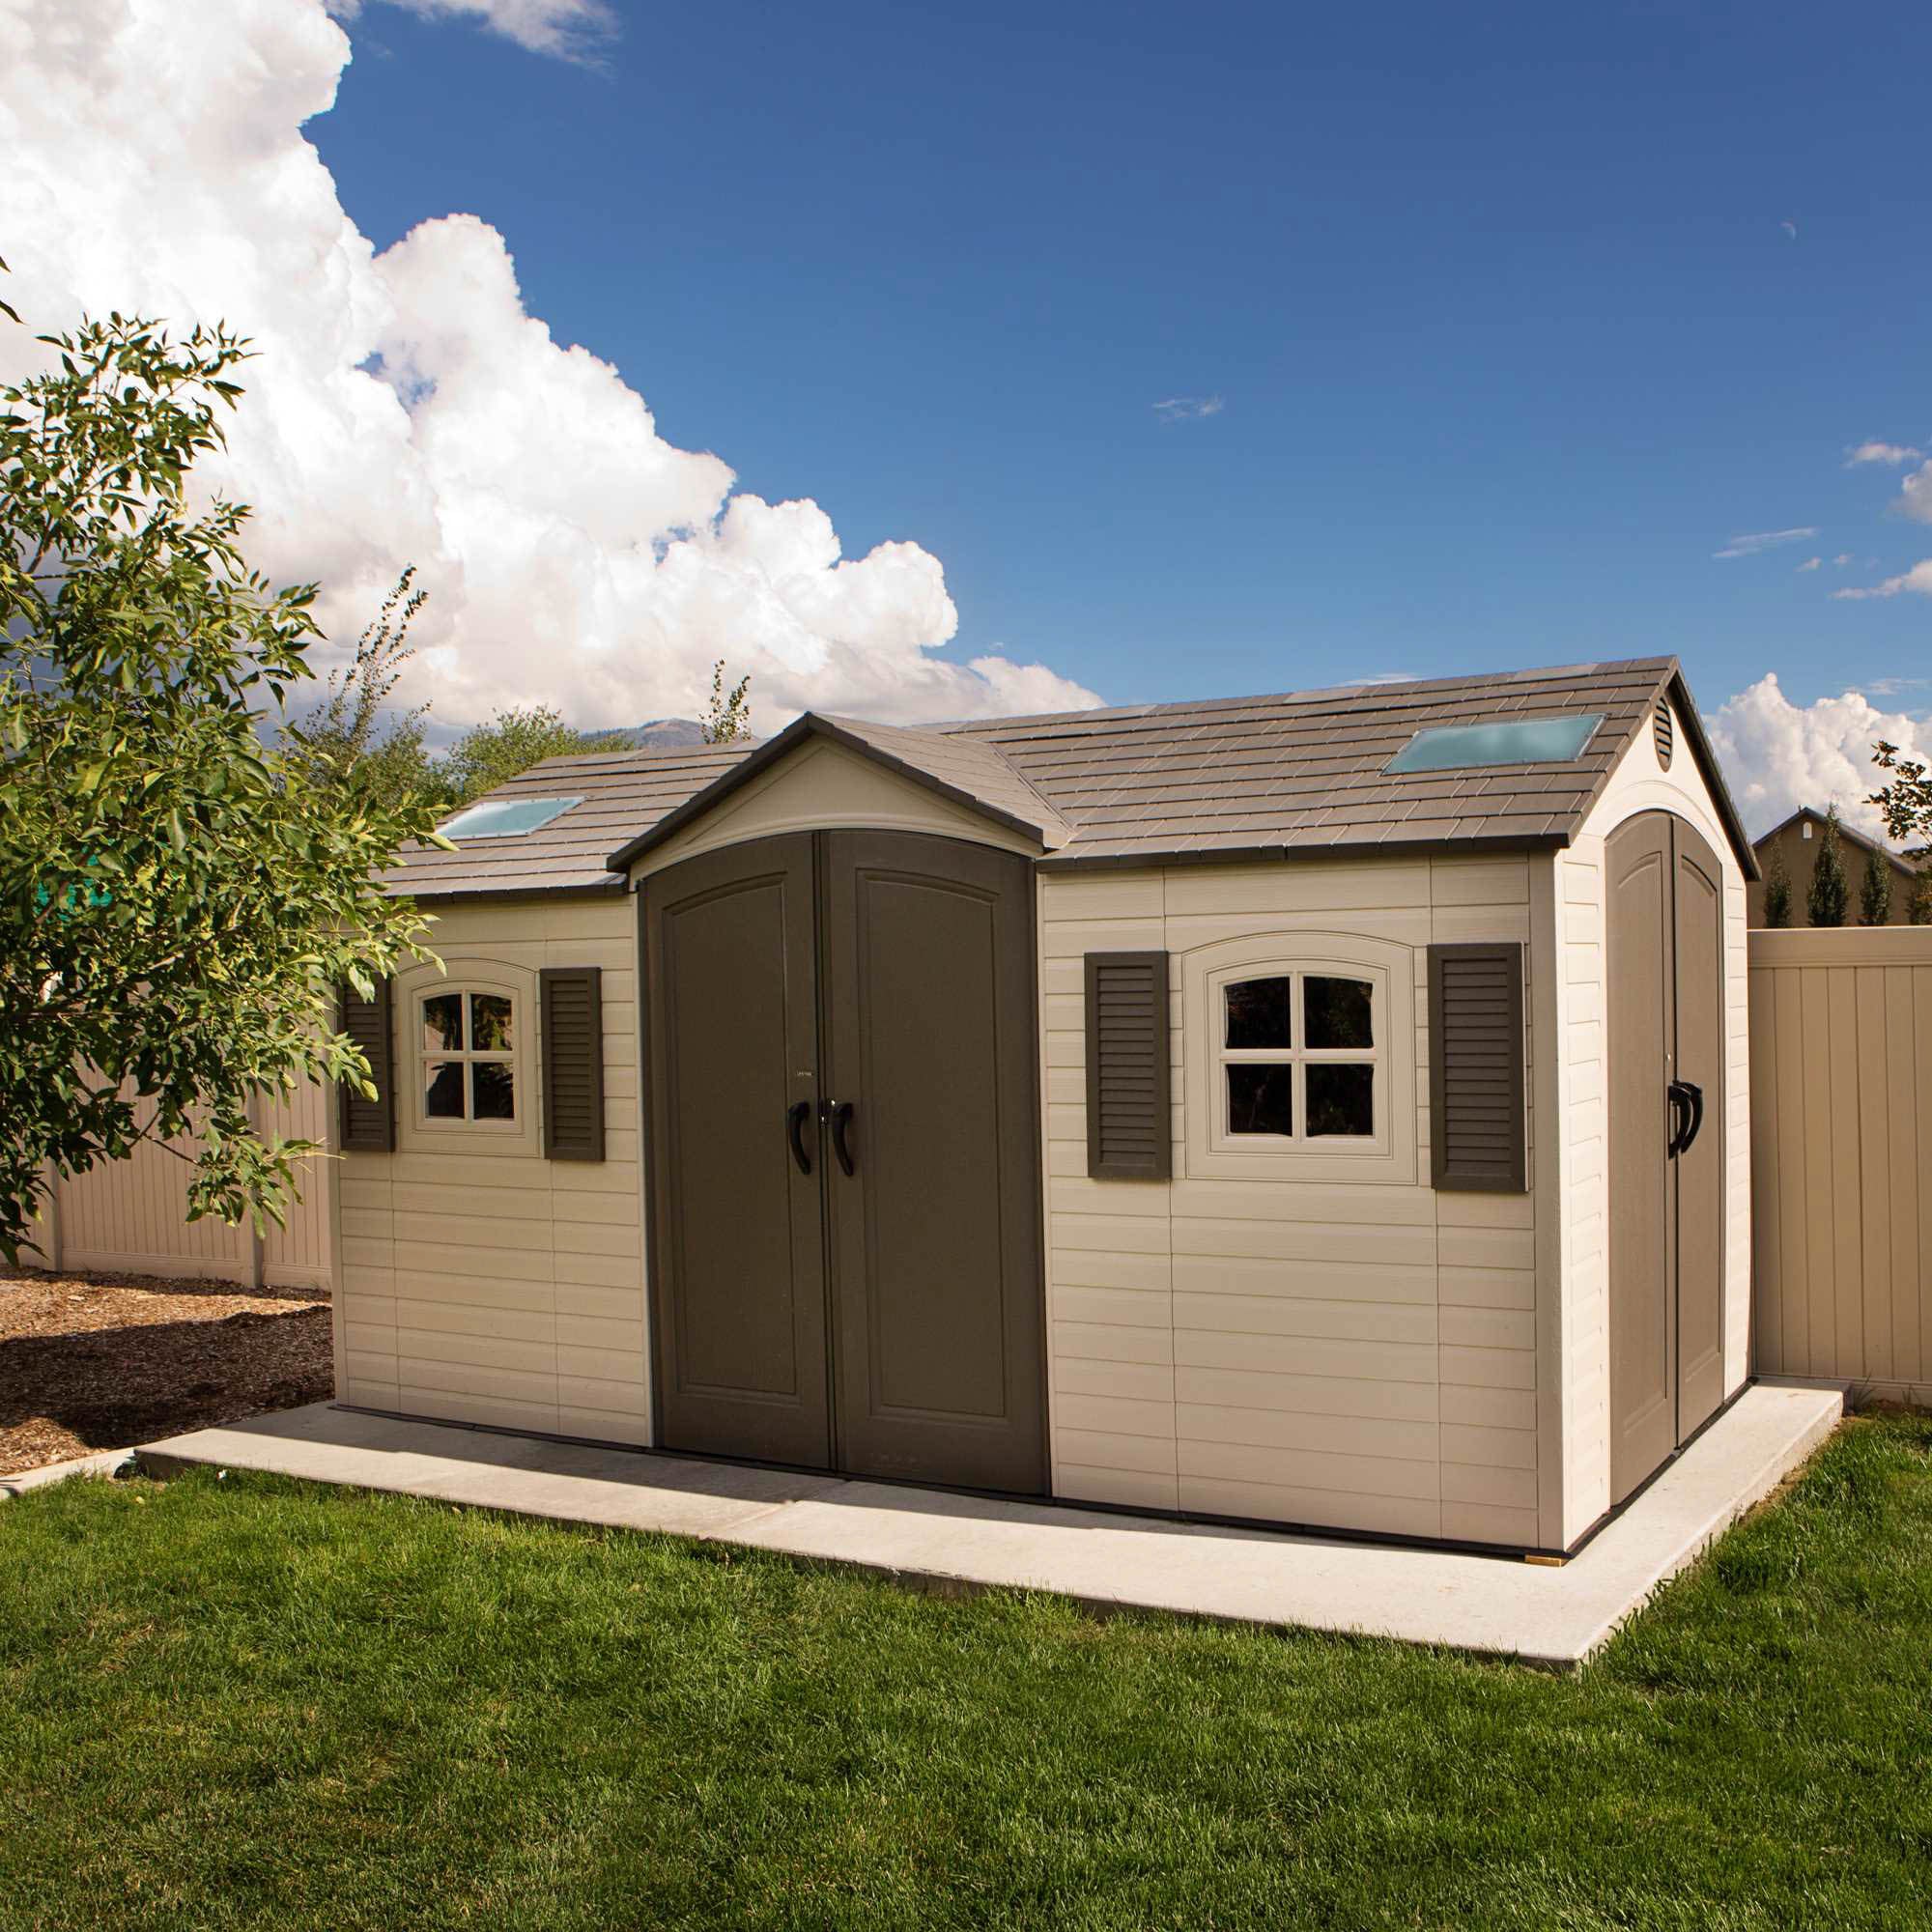 Lifetime 15 x 8' Outdoor Storage Shed with Side Door